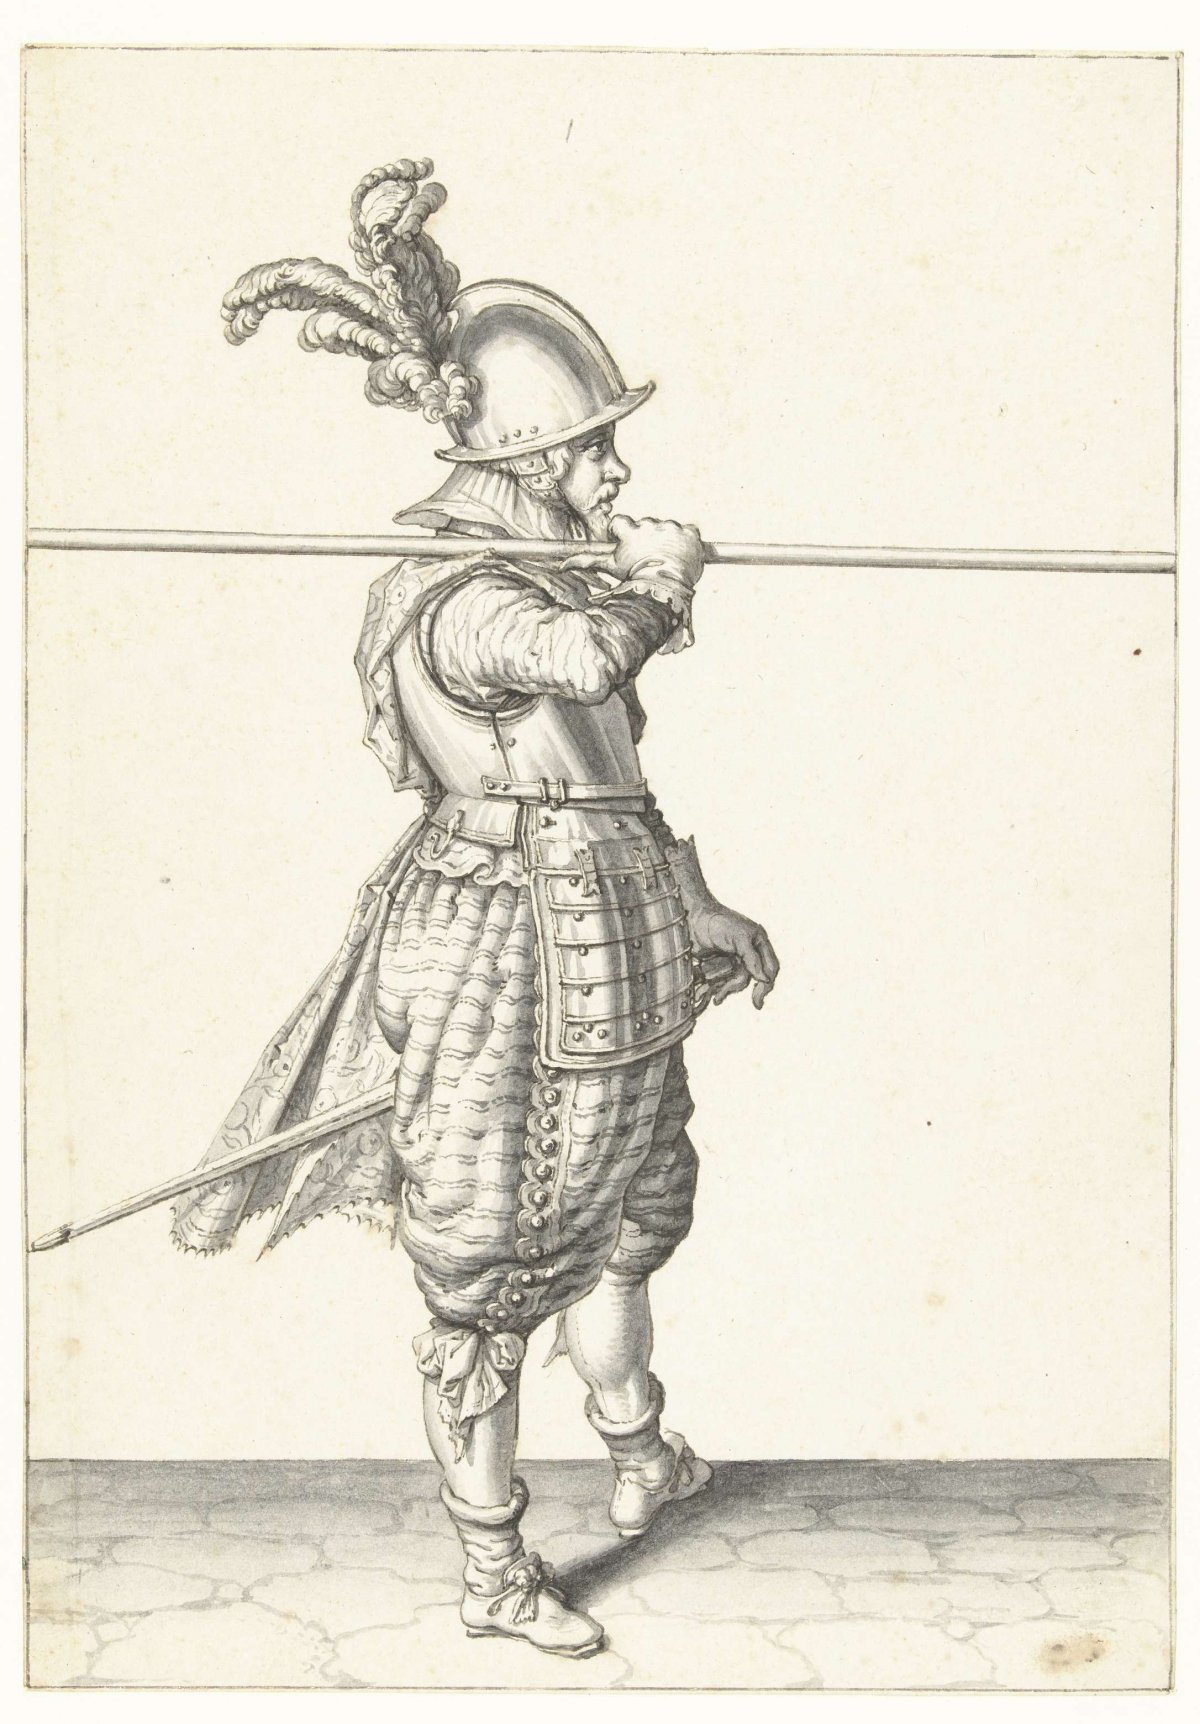 Soldier carrying his spear horizontally on his right shoulder, Jacques de Gheyn (II), 1596 - 1606